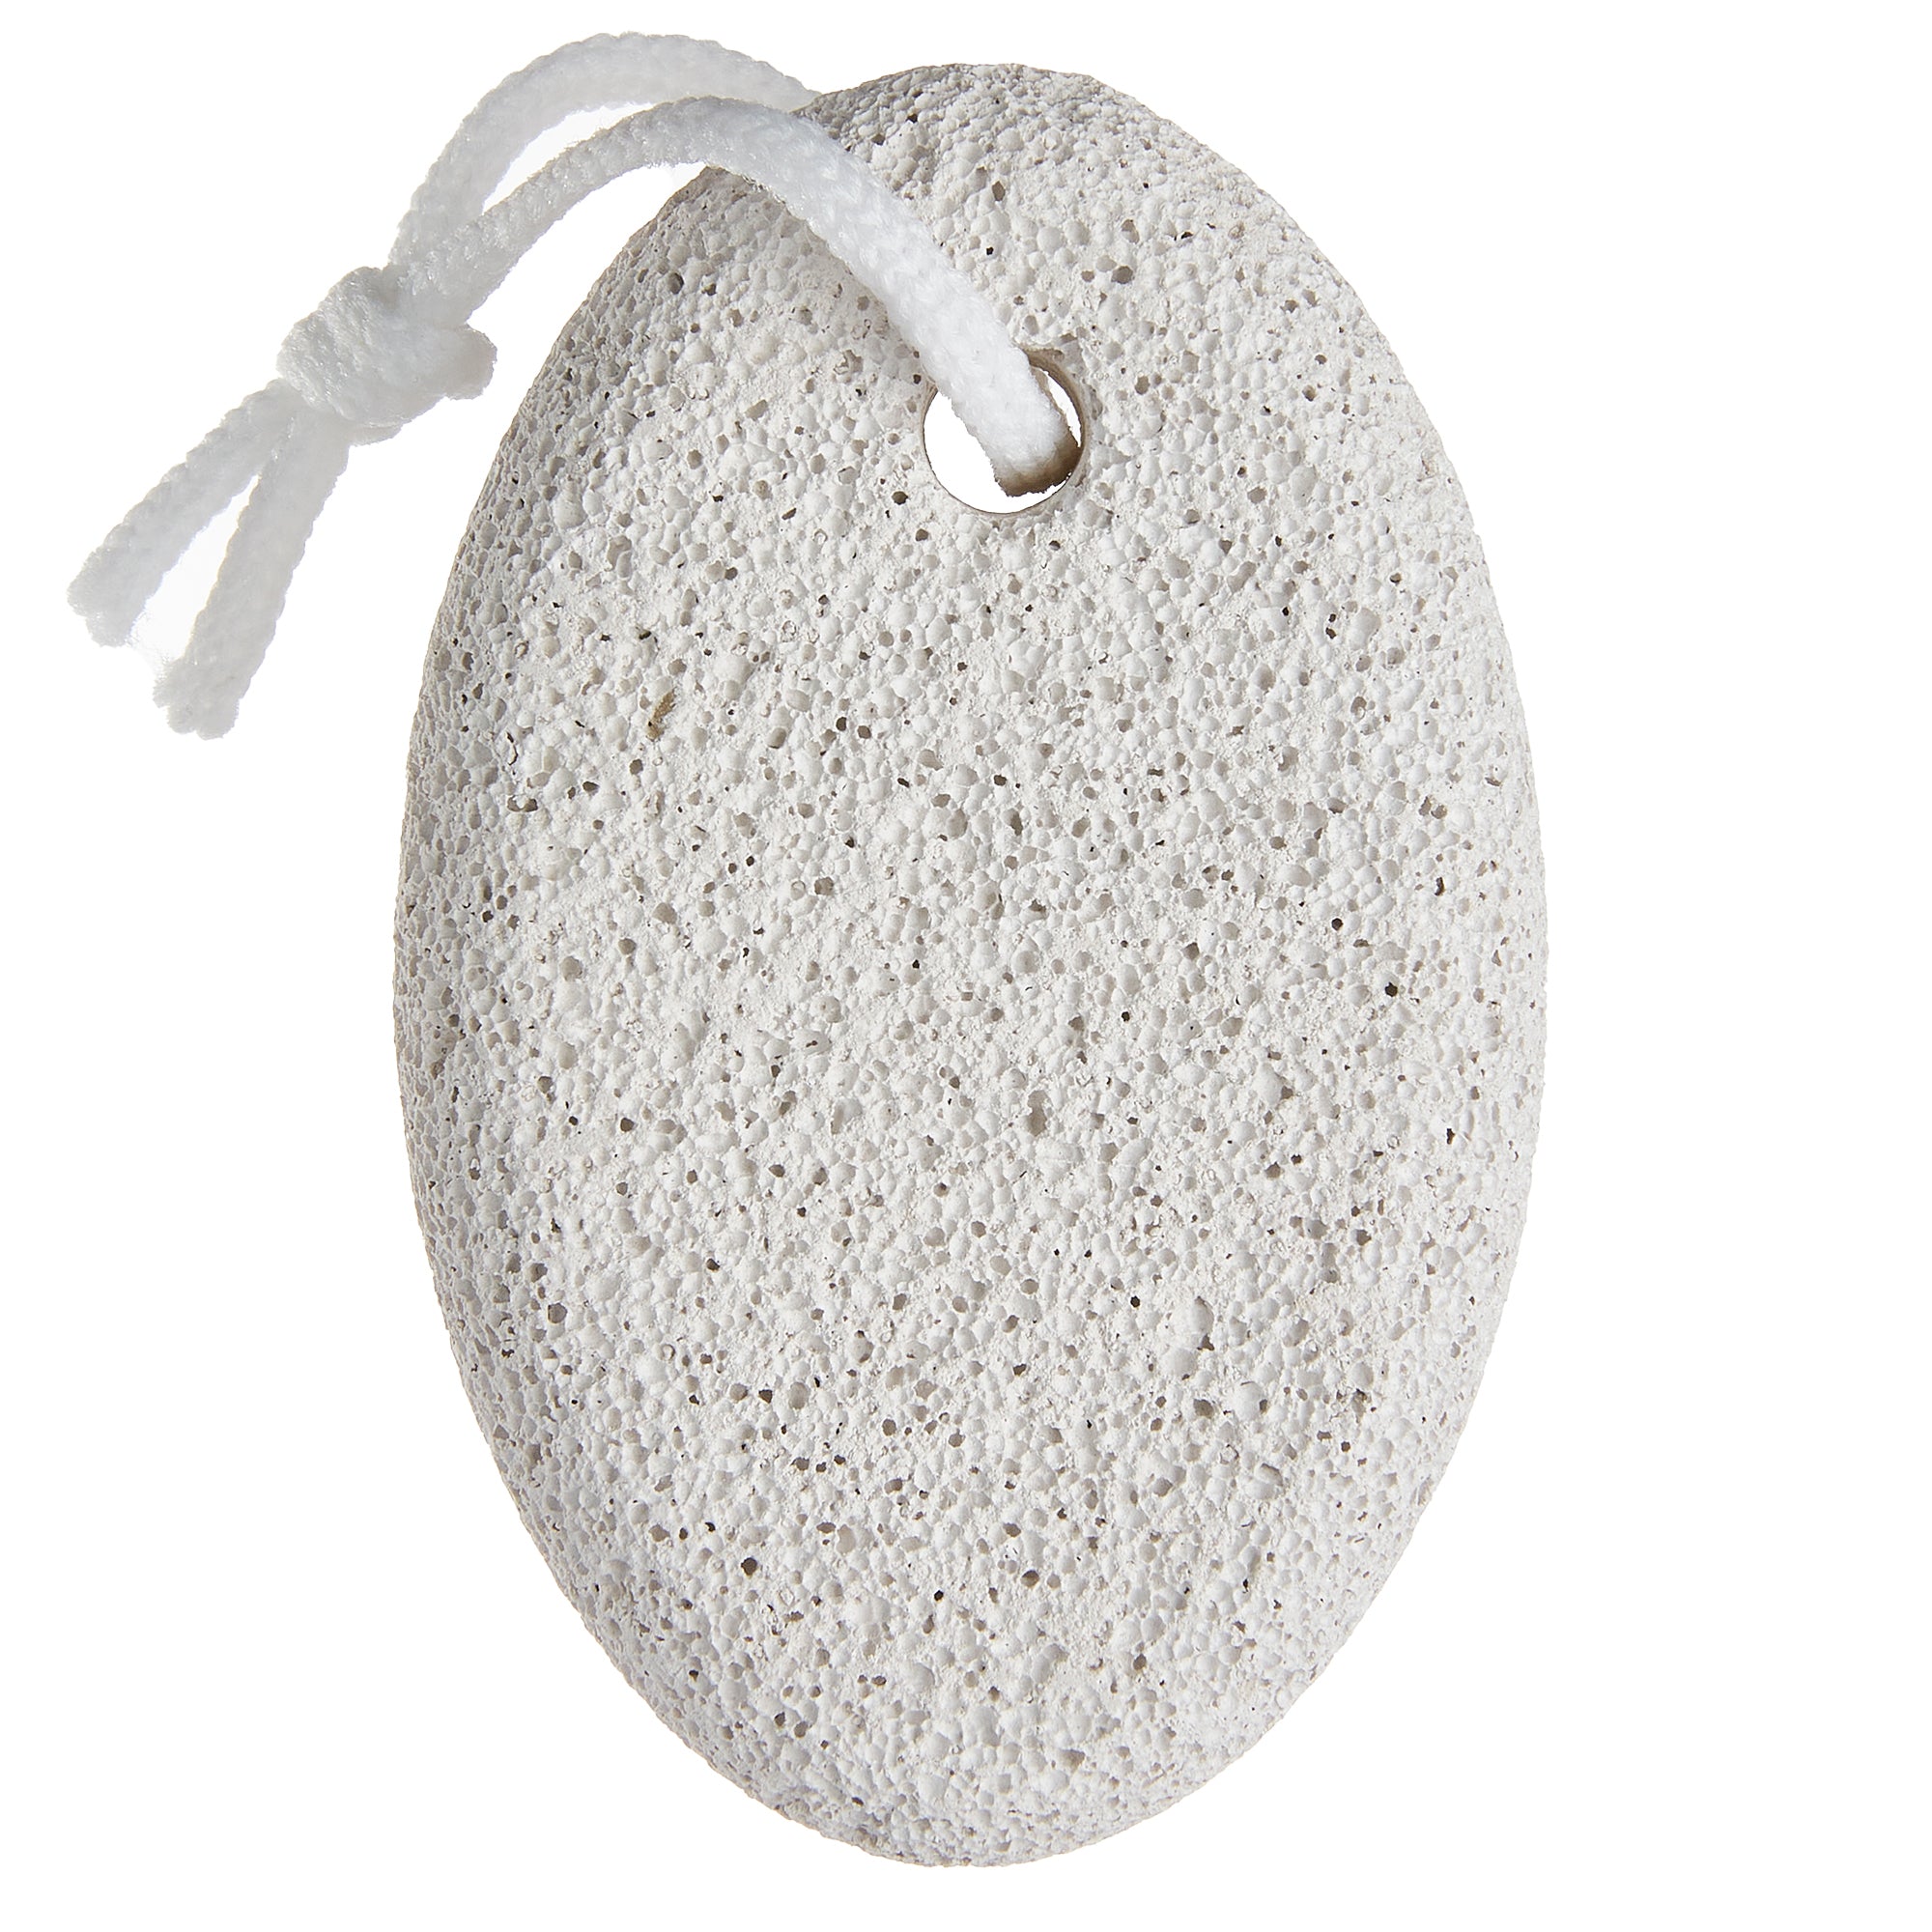 Natural Pumice Stone For Feet And Body